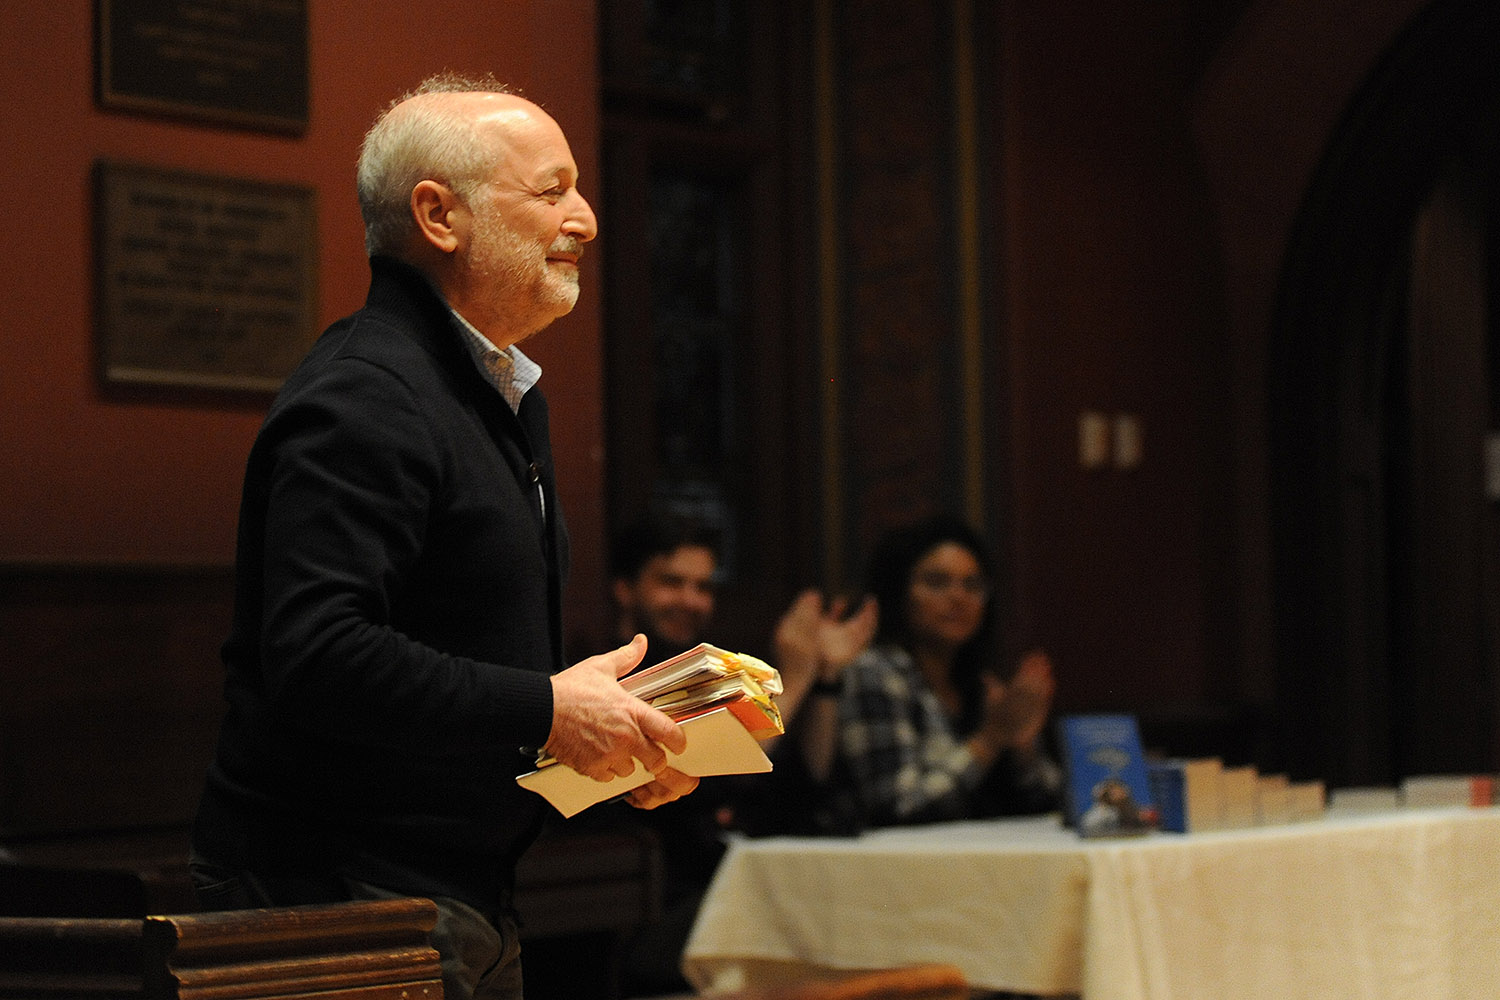 On April 25, Wesleyan welcomed award-winning writer and scholar Andre Aciman to campus to deliver the 2018 Annie Sonnenblick lecture. 